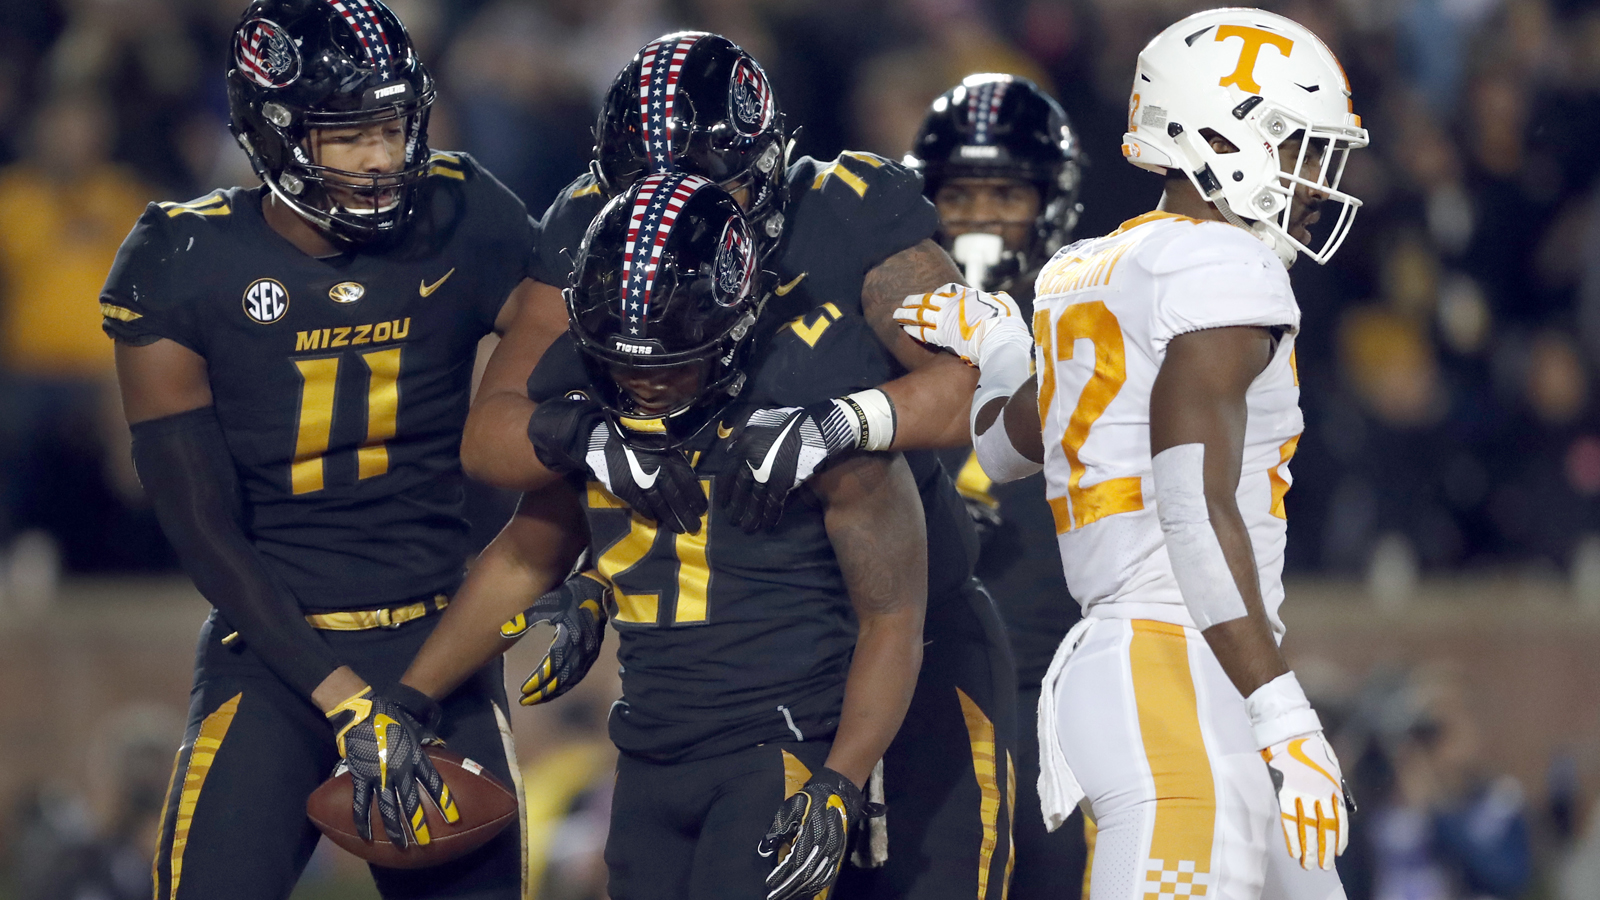 Witter runs wild as Mizzou earns 50-17 victory over Tennessee